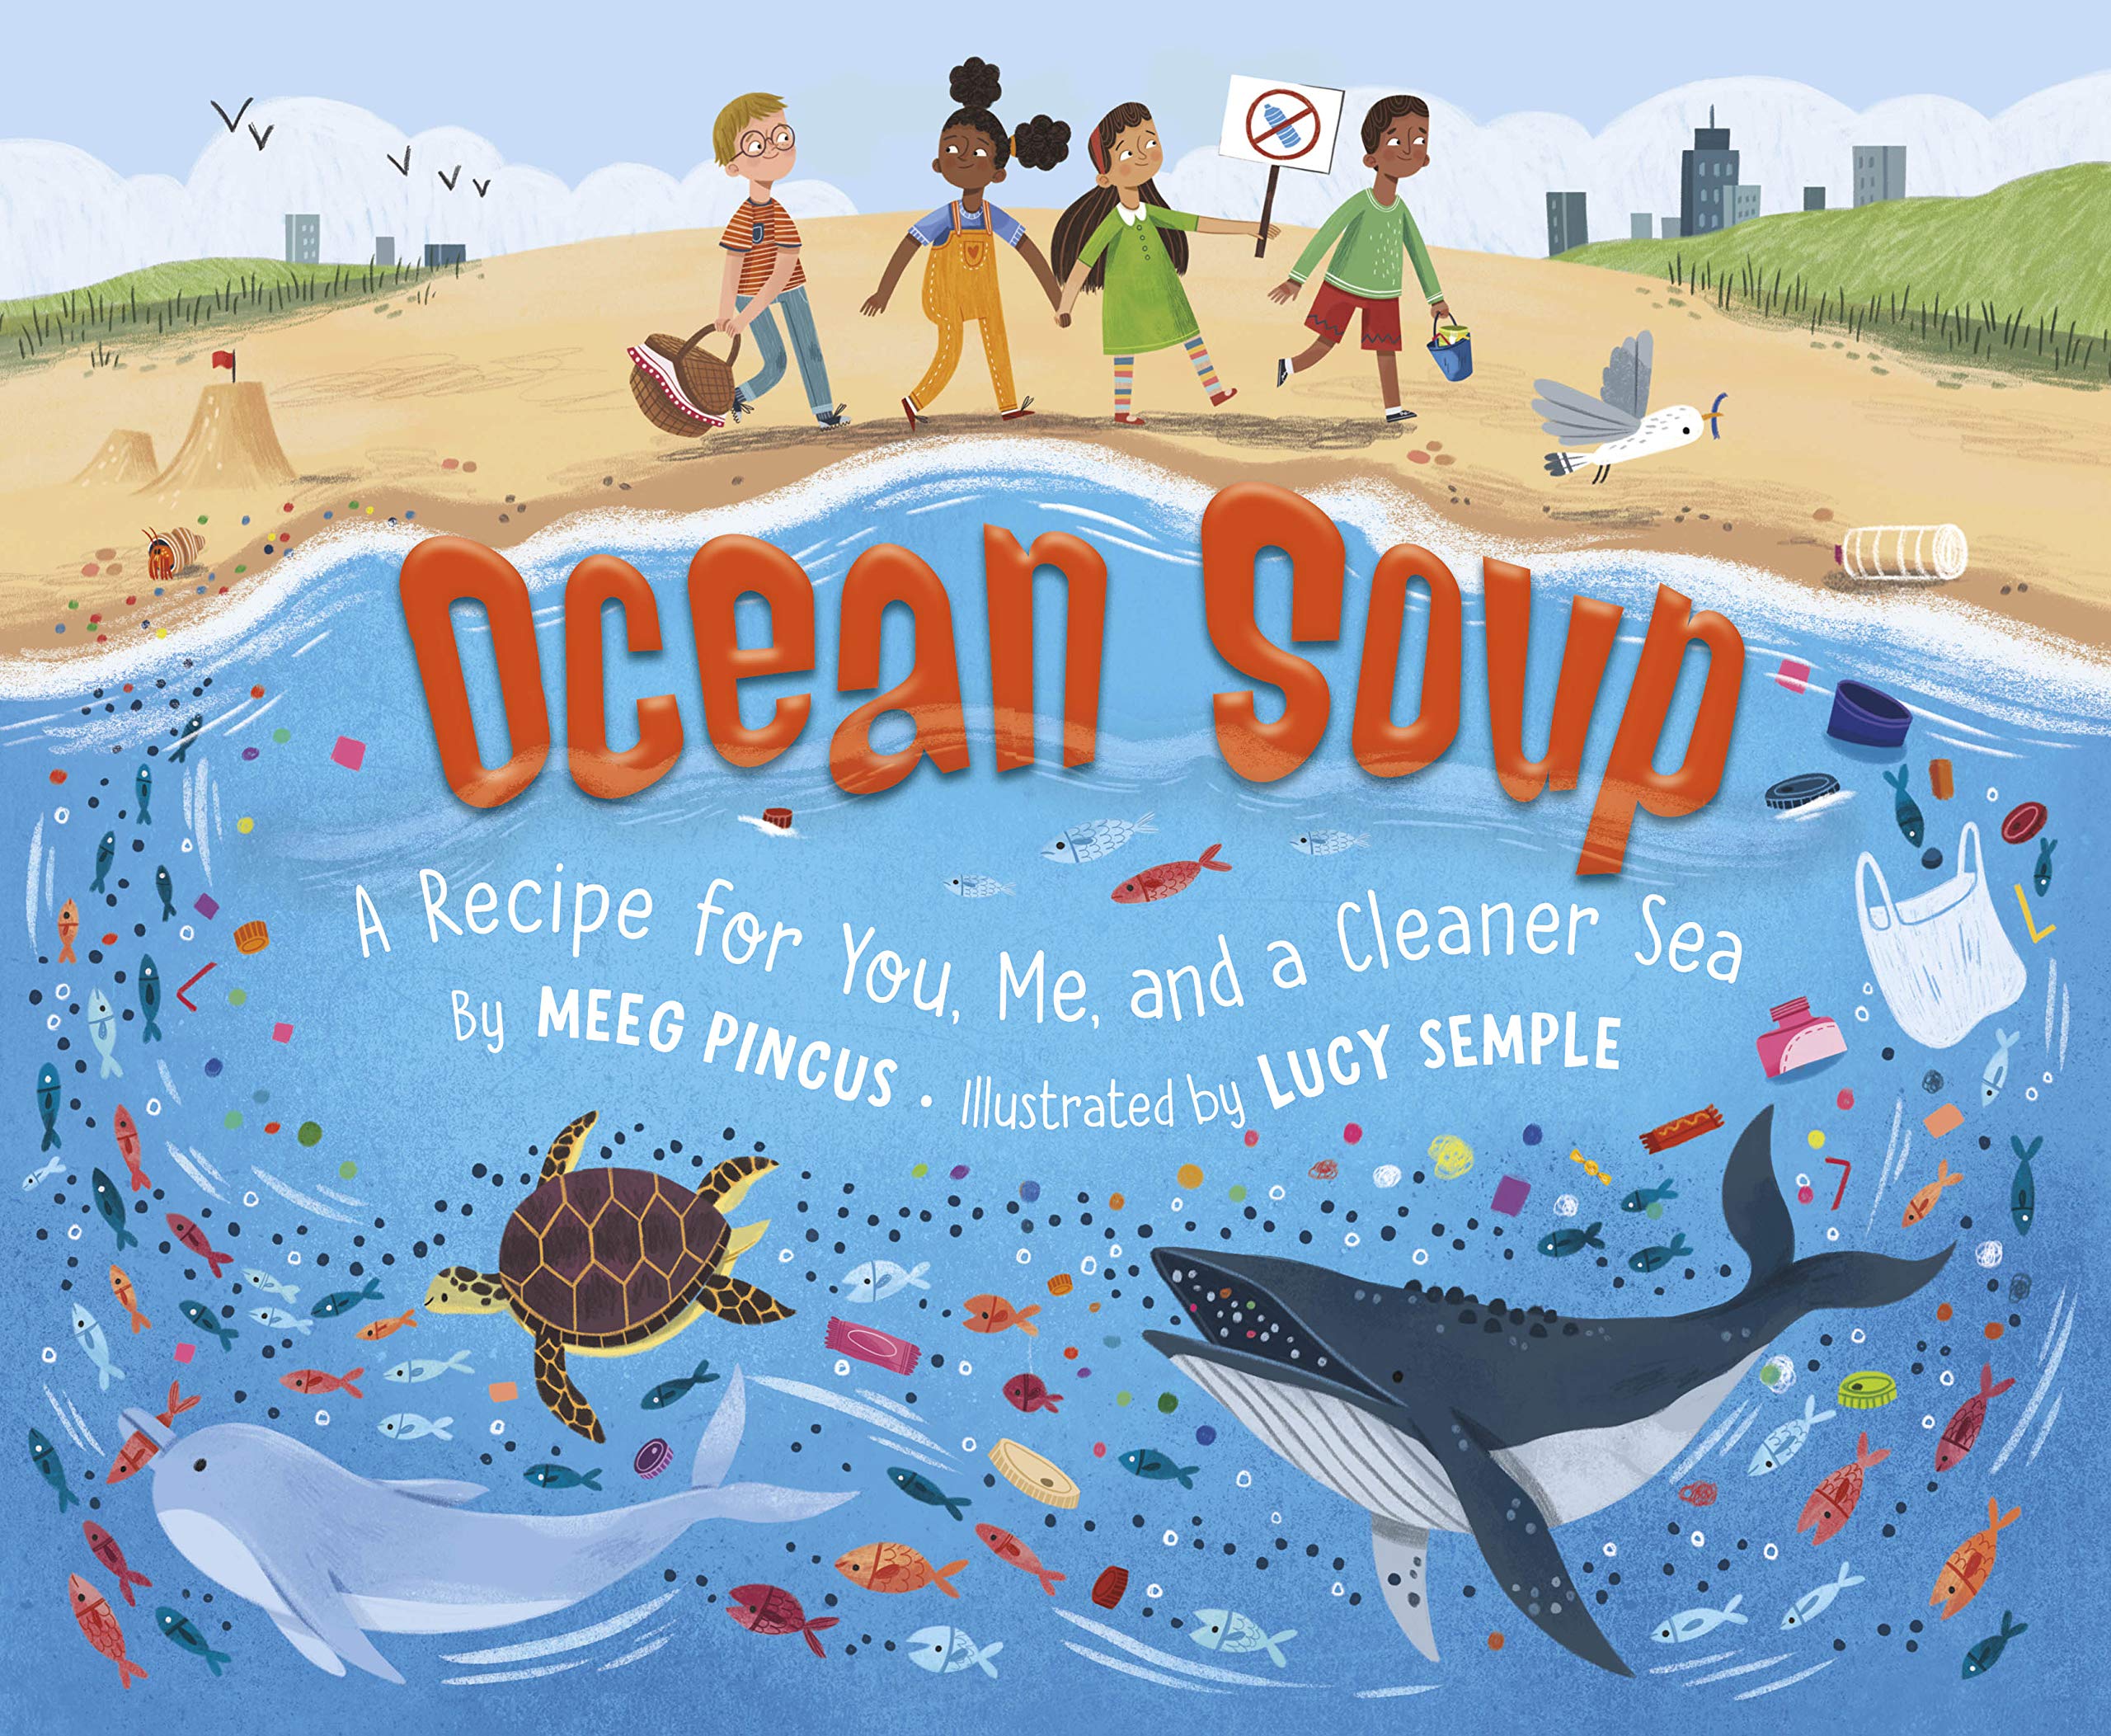 Ocean Soup: A Recipe for You, Me, and a Cleaner Sea